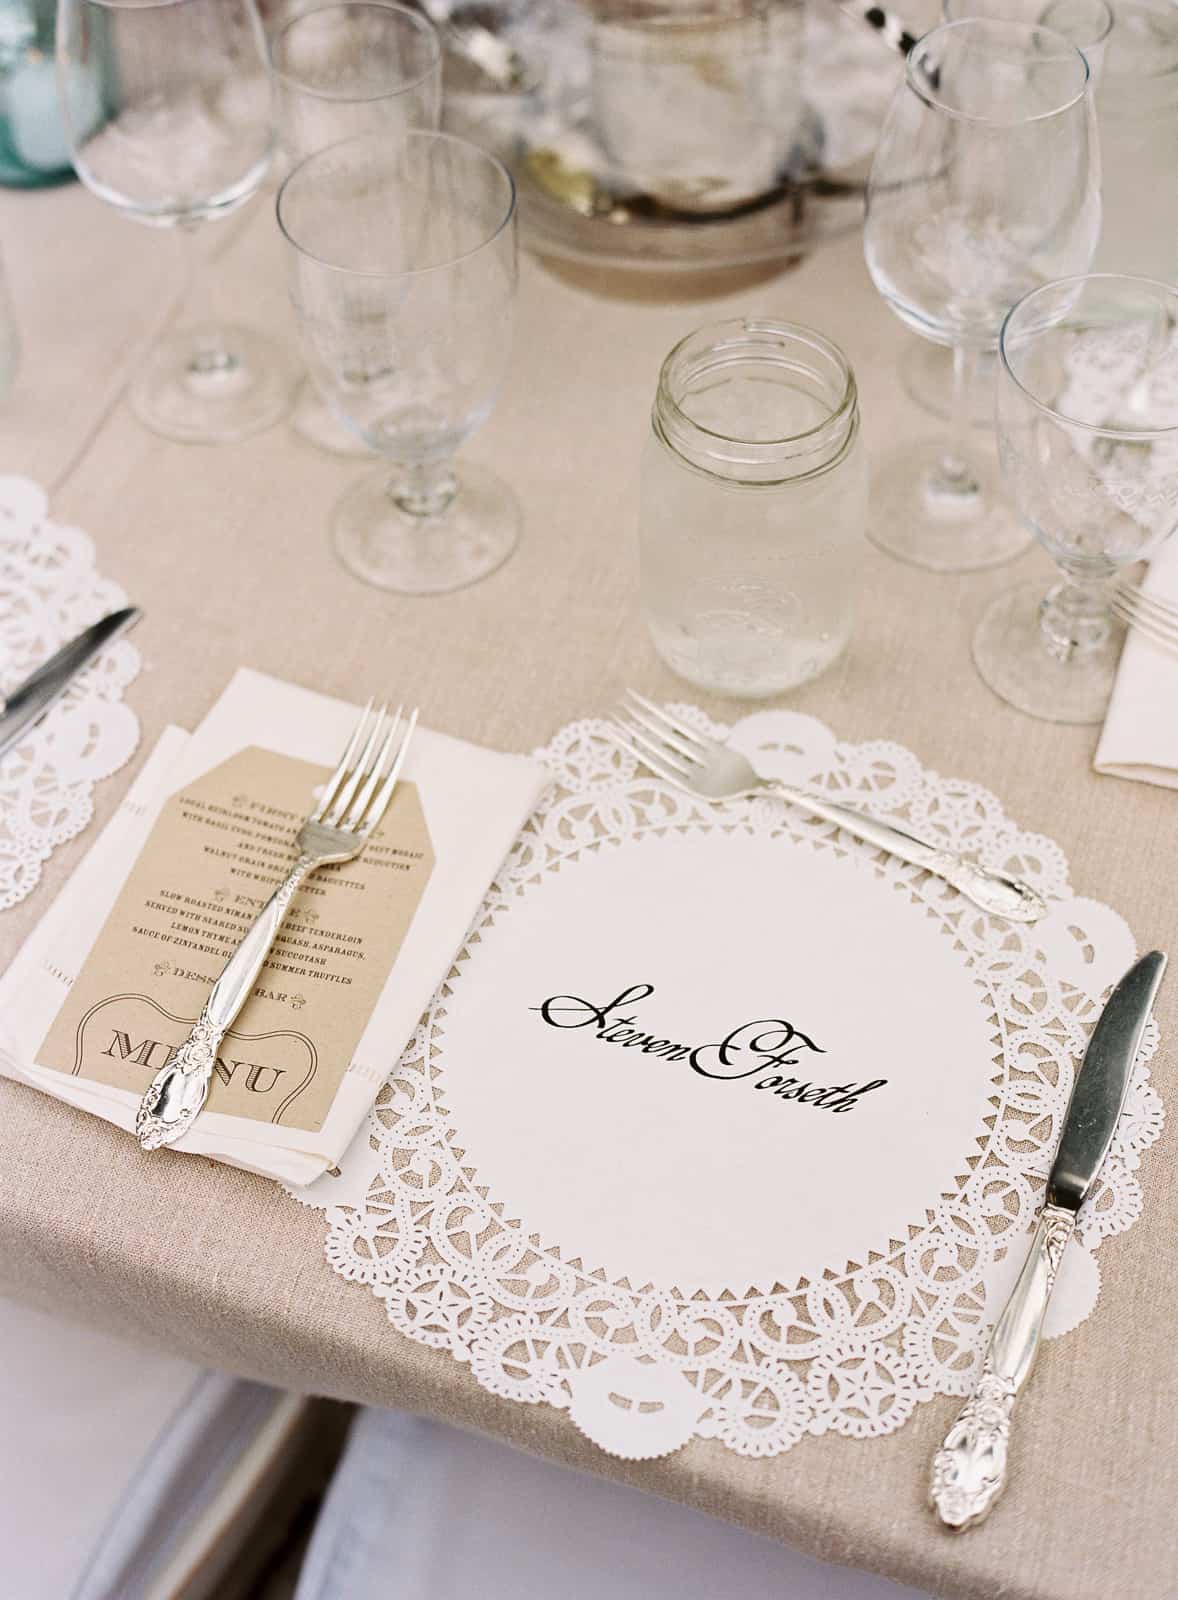 Dinner place setting with hand lettered doilies